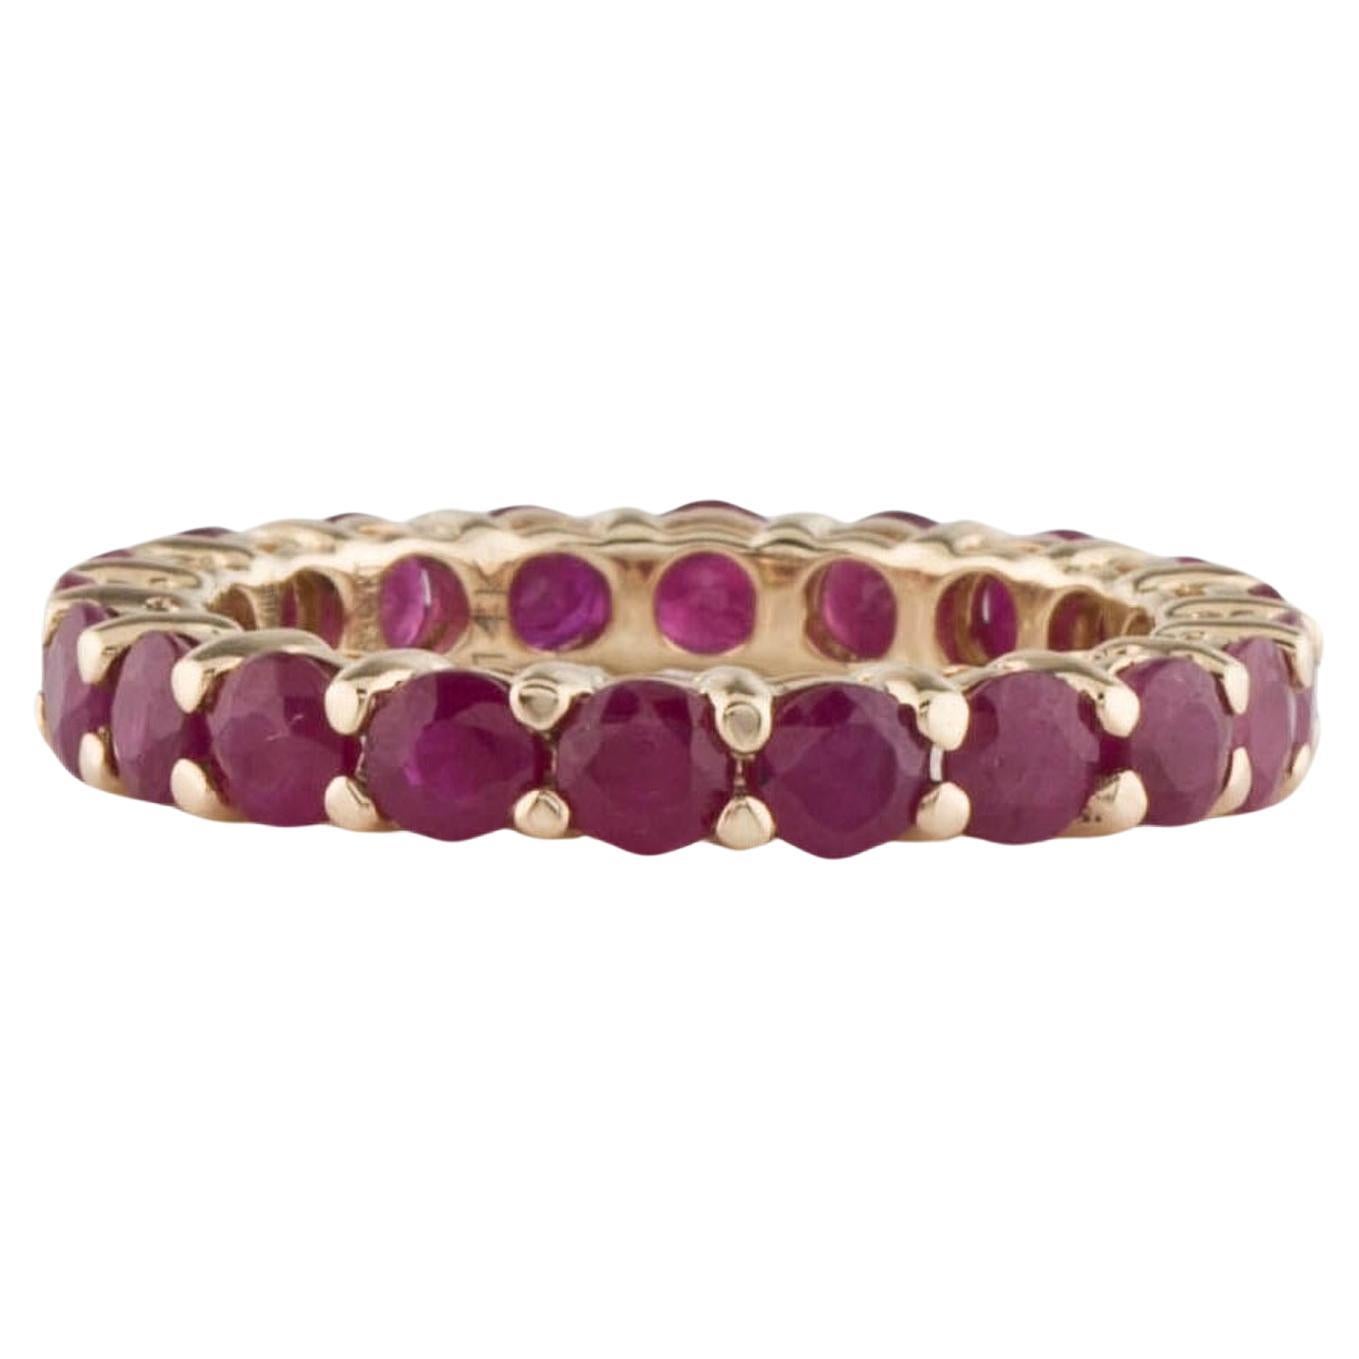 Luxurious 14K Ruby Eternity Band Ring 2.96ctw Size 7 - Elegant Statement Jewelry For Sale